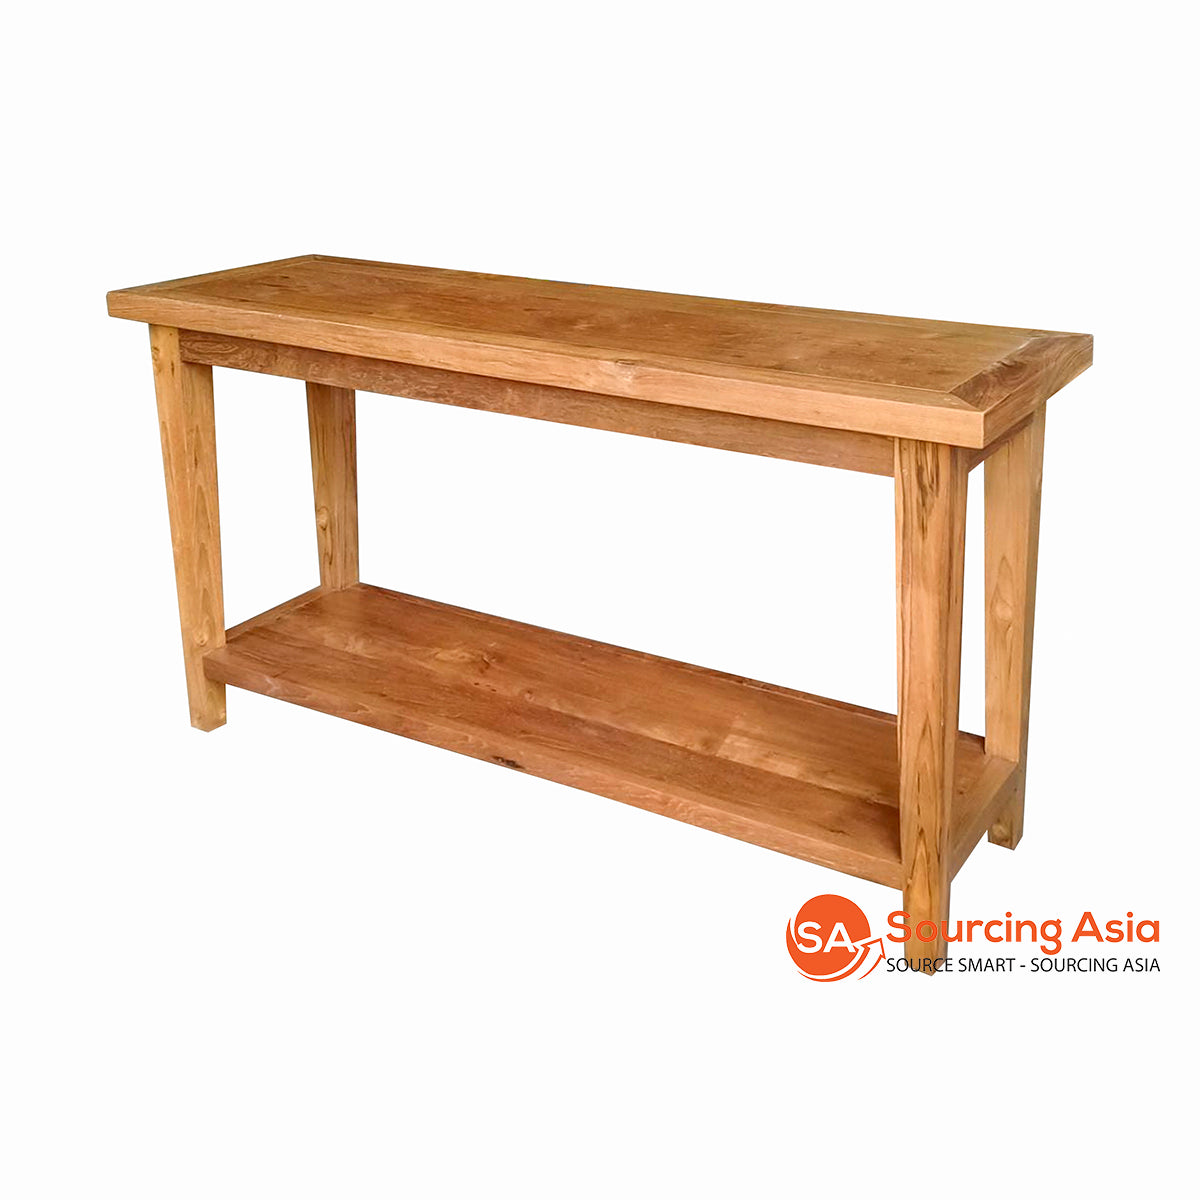 IDRS017-5 OLD TEAK CONSOLE TABLE FOR DISPLAYING GOODS IN SHOPS IN JAVA